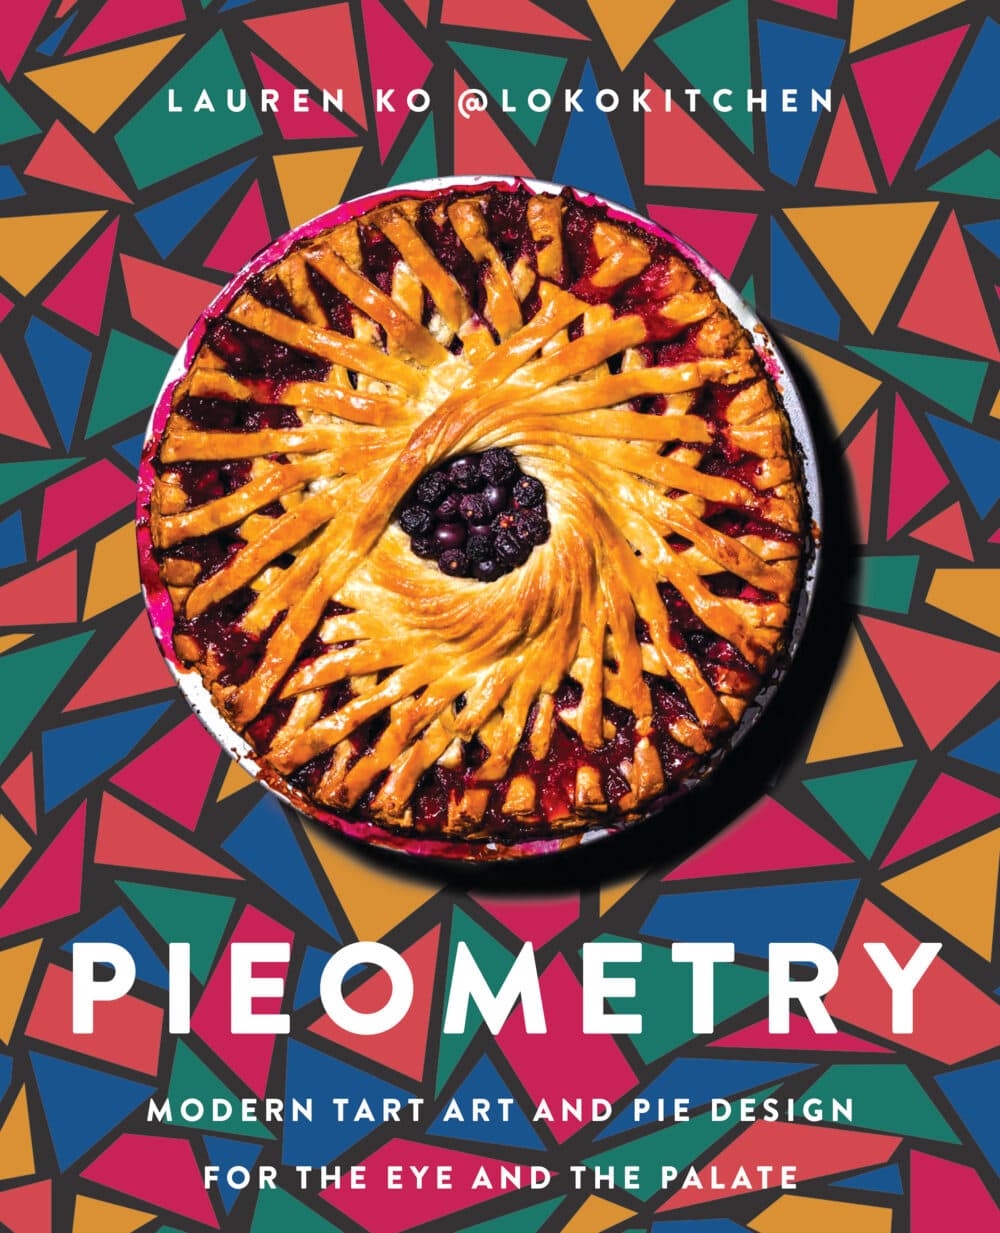 The cover of “Pieometry: Modern Tart Art and Pie Design for the Eye and the Palate.&quot; (Courtesy of Ed Anderson)